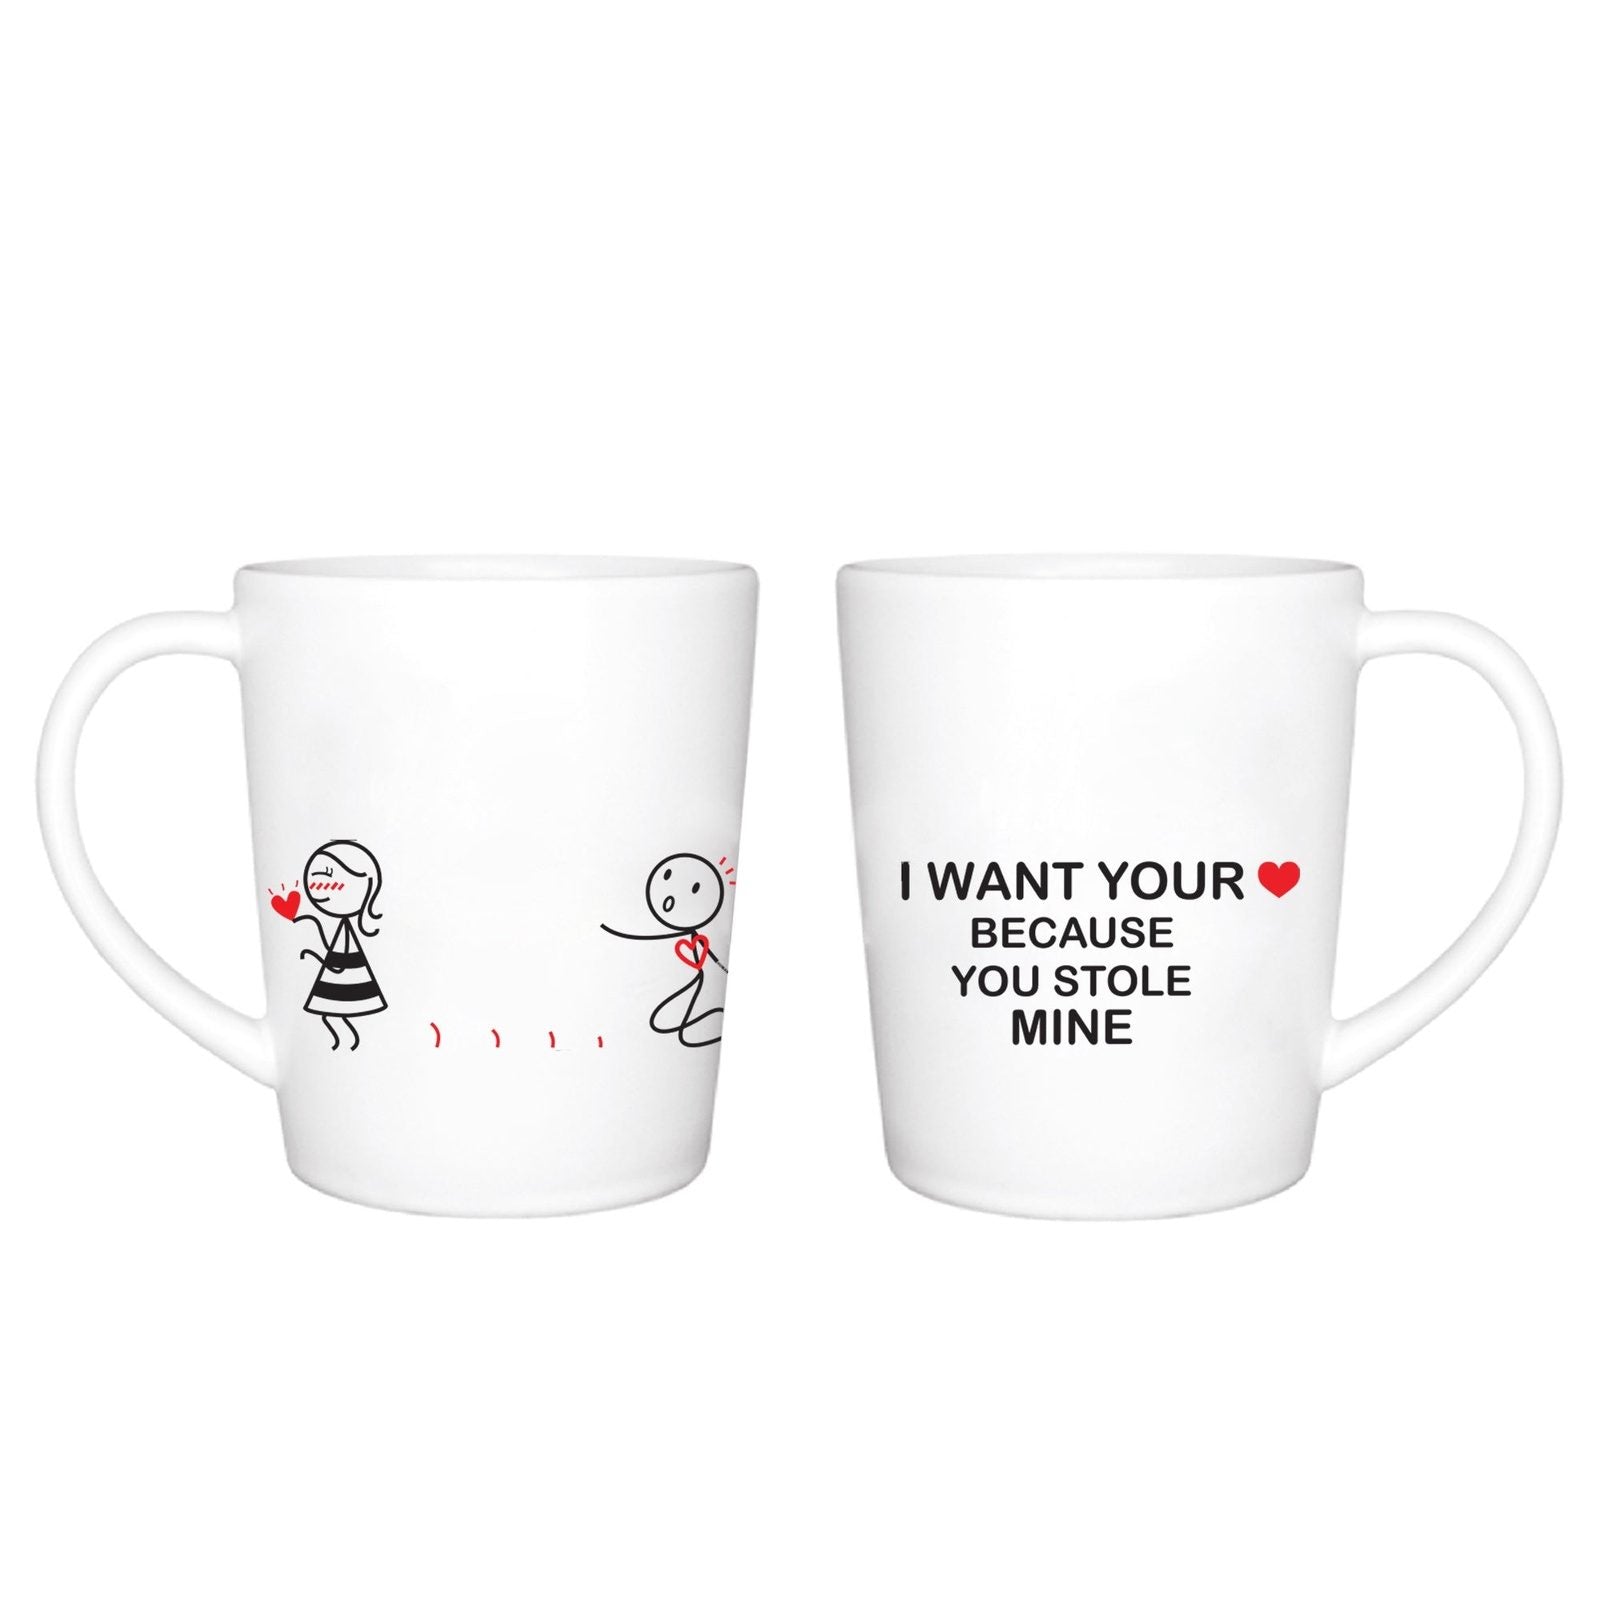 You steal my heart! But I let you keep it.Home & GardenHuman Touch OfficialHere's the perfect mug for the special someone who stole your heart and you just can't seem to get it back! With the cute yet cheeky inscription, "I want your heart 